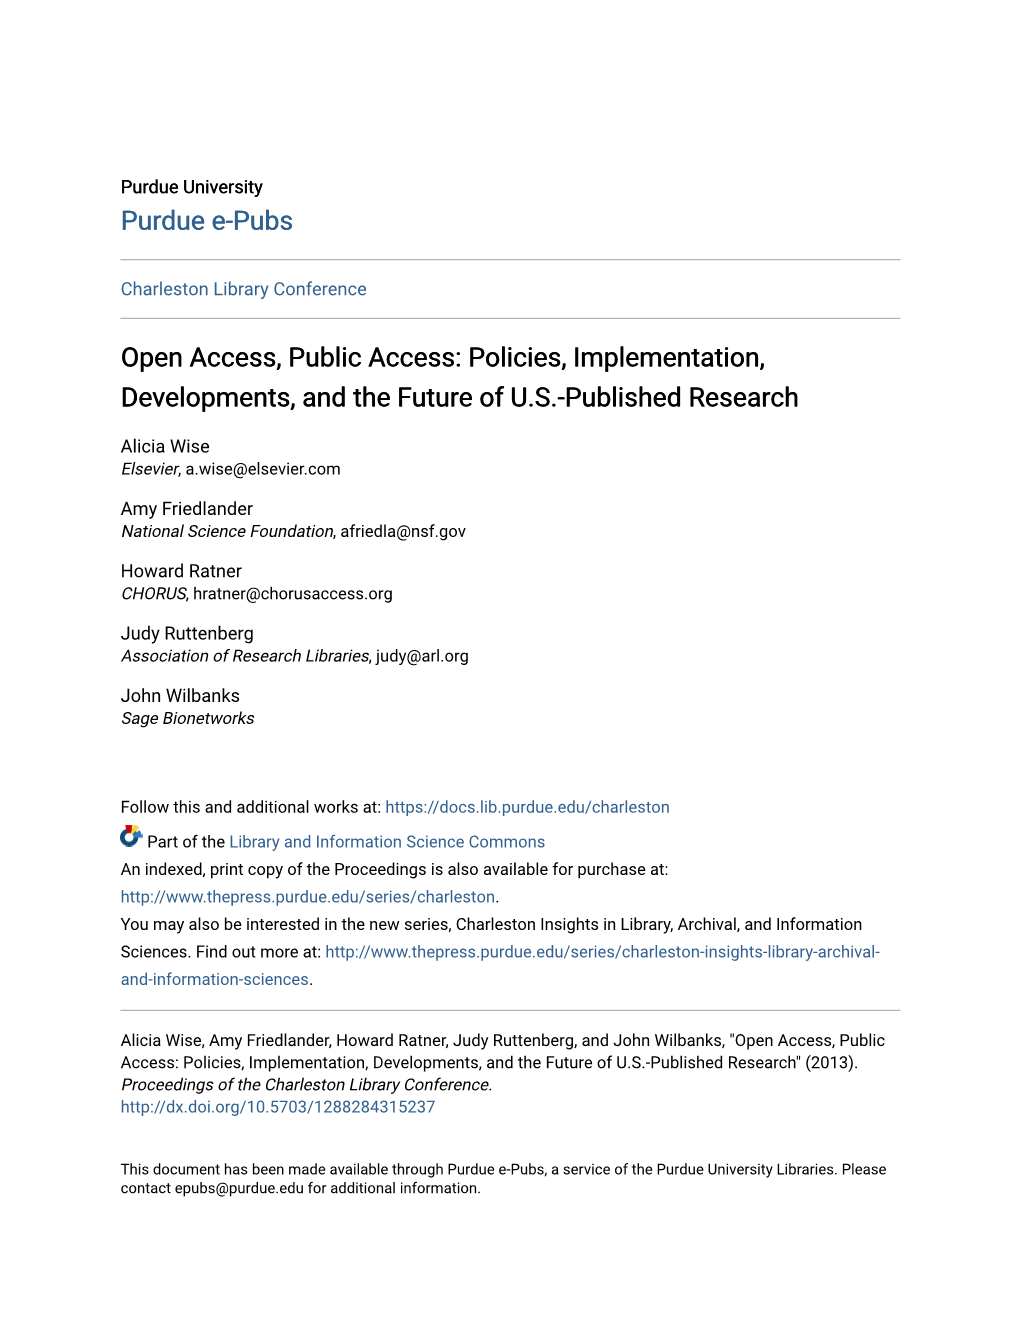 Open Access, Public Access: Policies, Implementation, Developments, and the Future of U.S.-Published Research